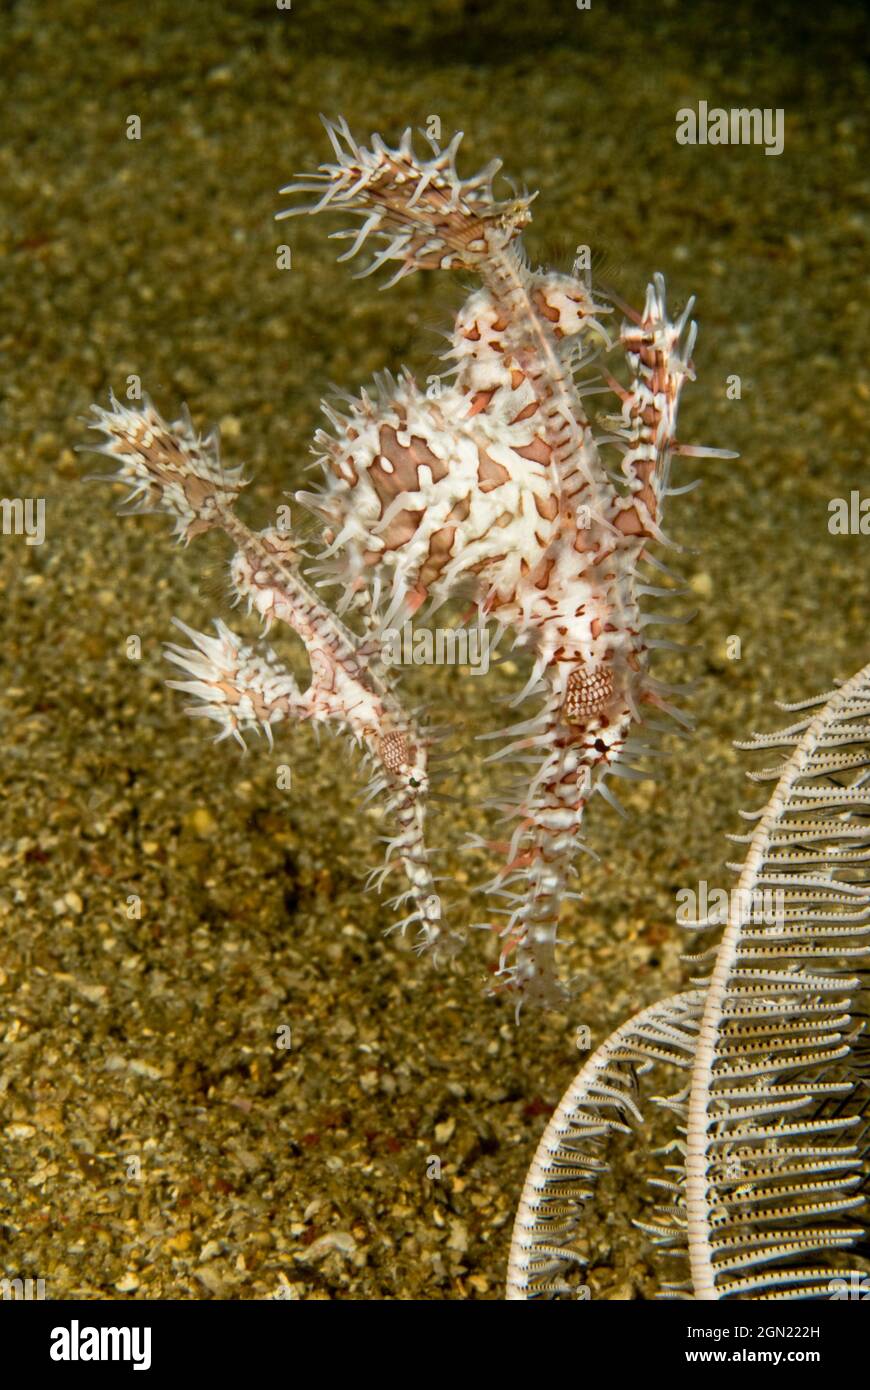 Ornate or Harlequin ghost pipefish (Solenostomus paradoxus), about 10 cm long.. Anilao, Manila, Philippines Stock Photo